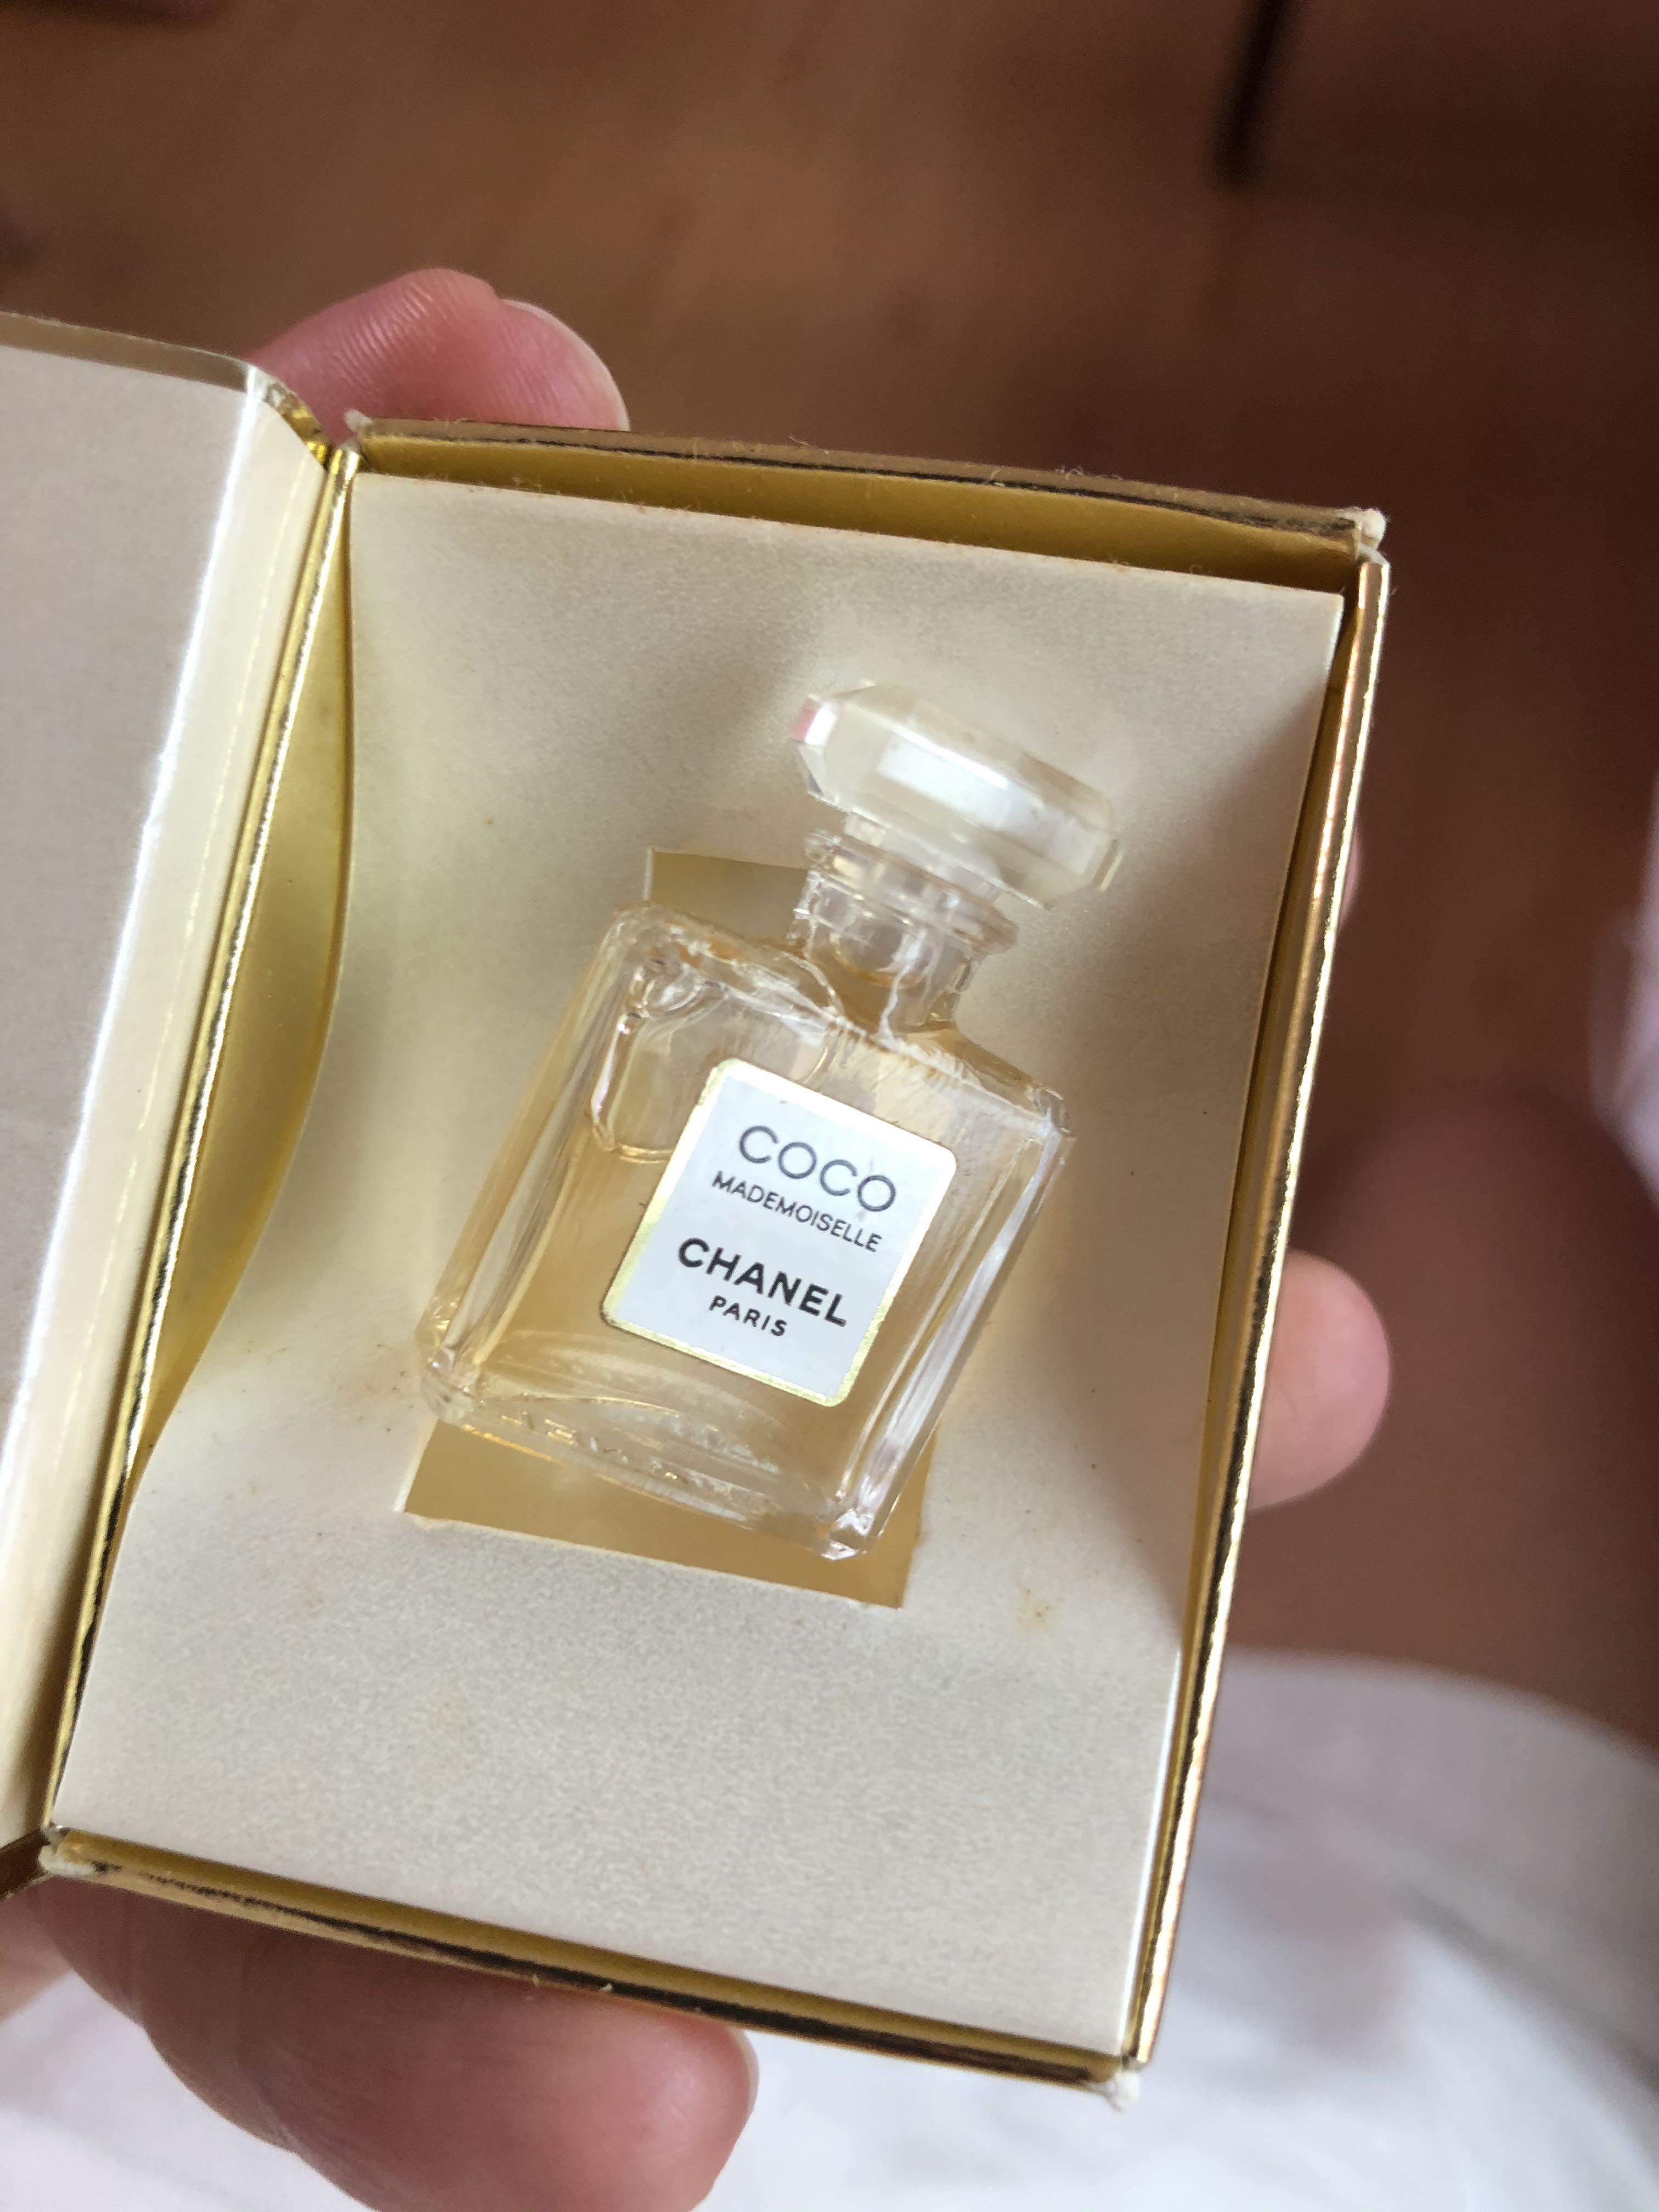 Authentic collectable coco Chanel mademoiselle miniature perfume